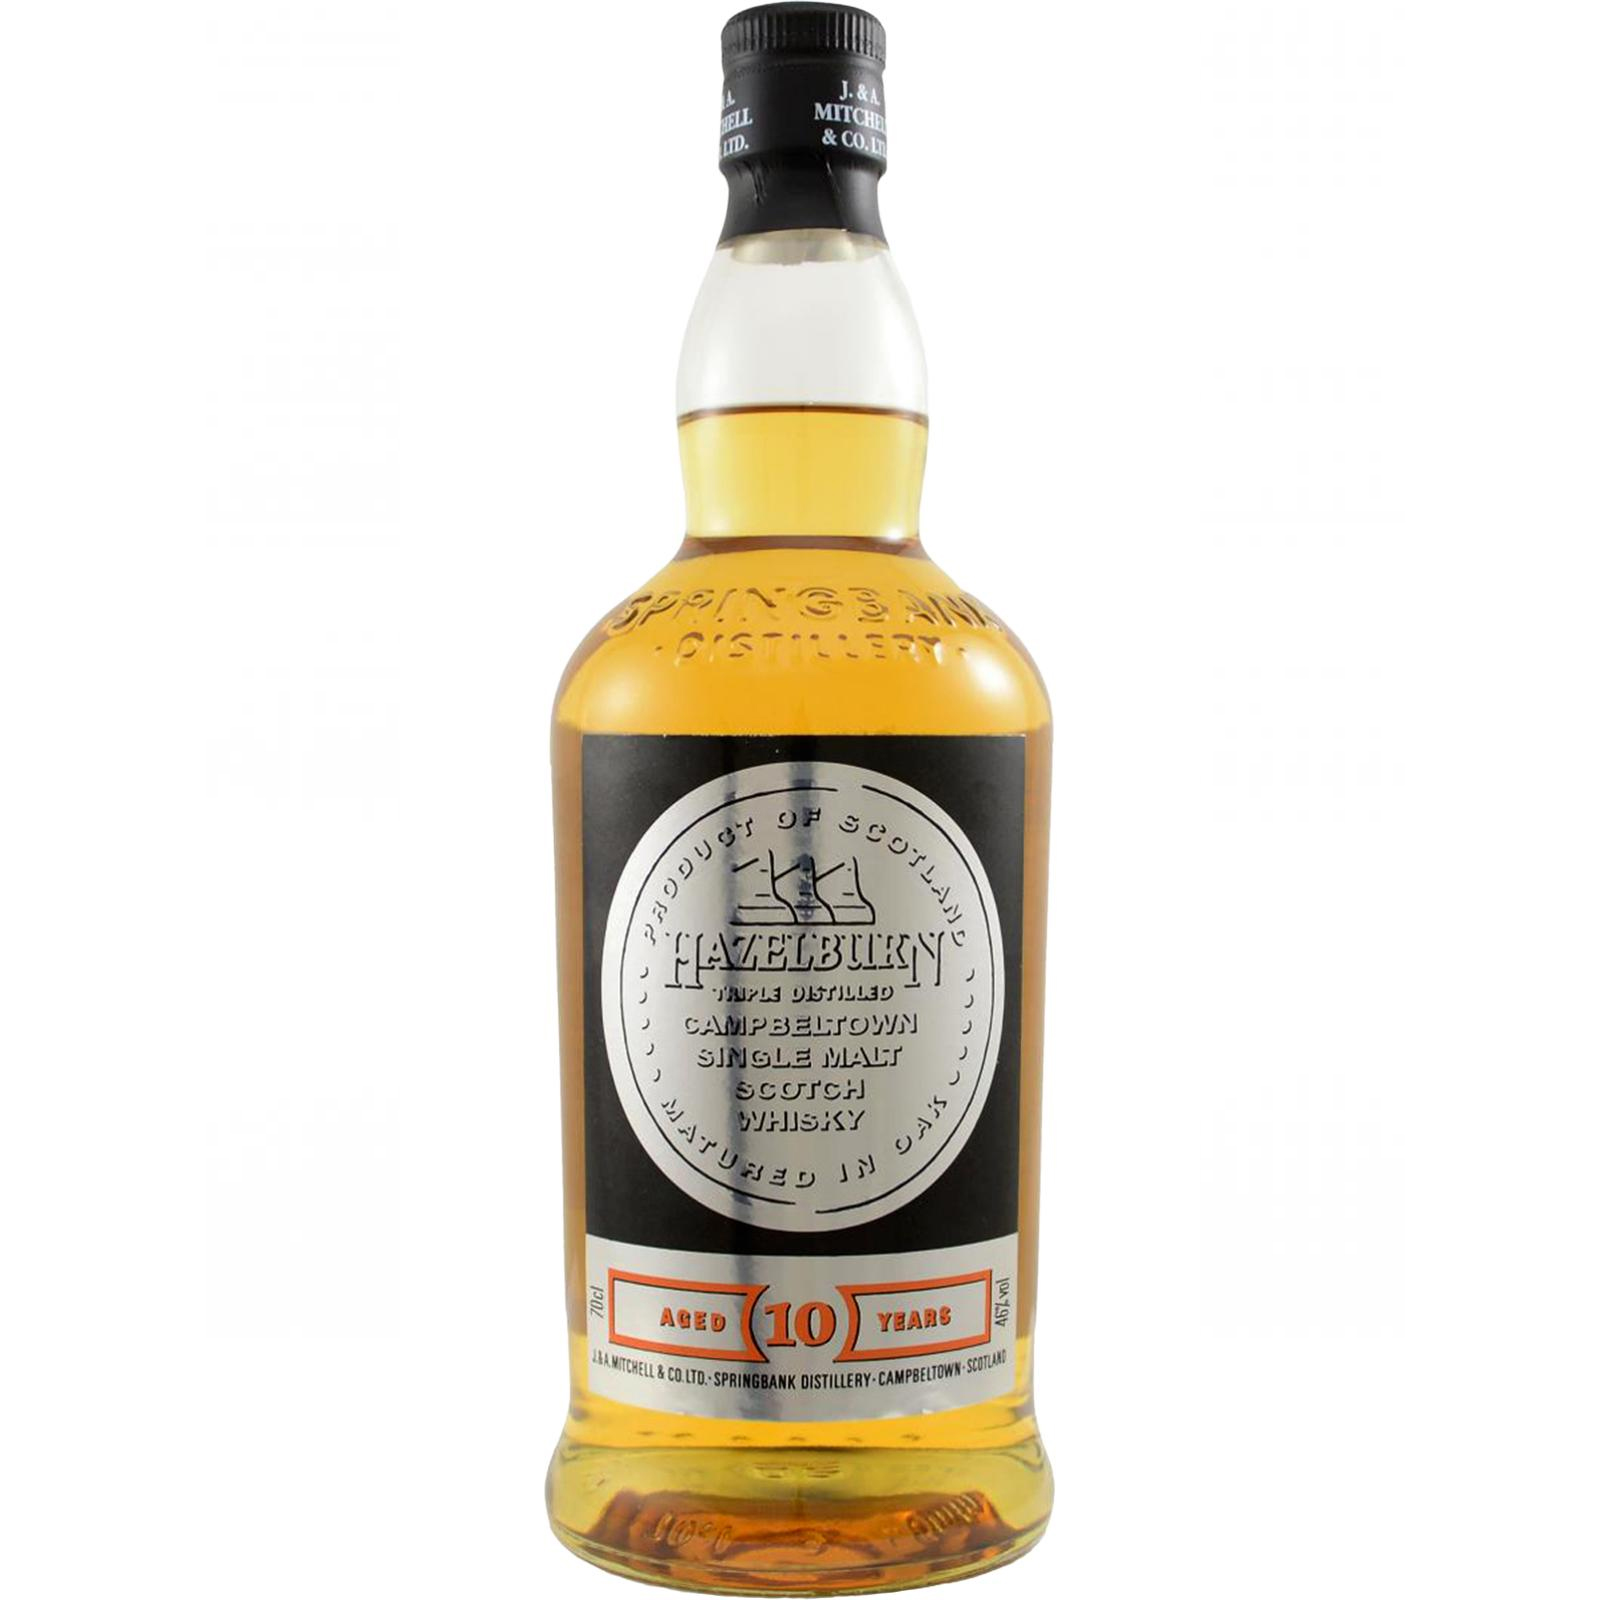 You are currently viewing Hazelburn 10 years